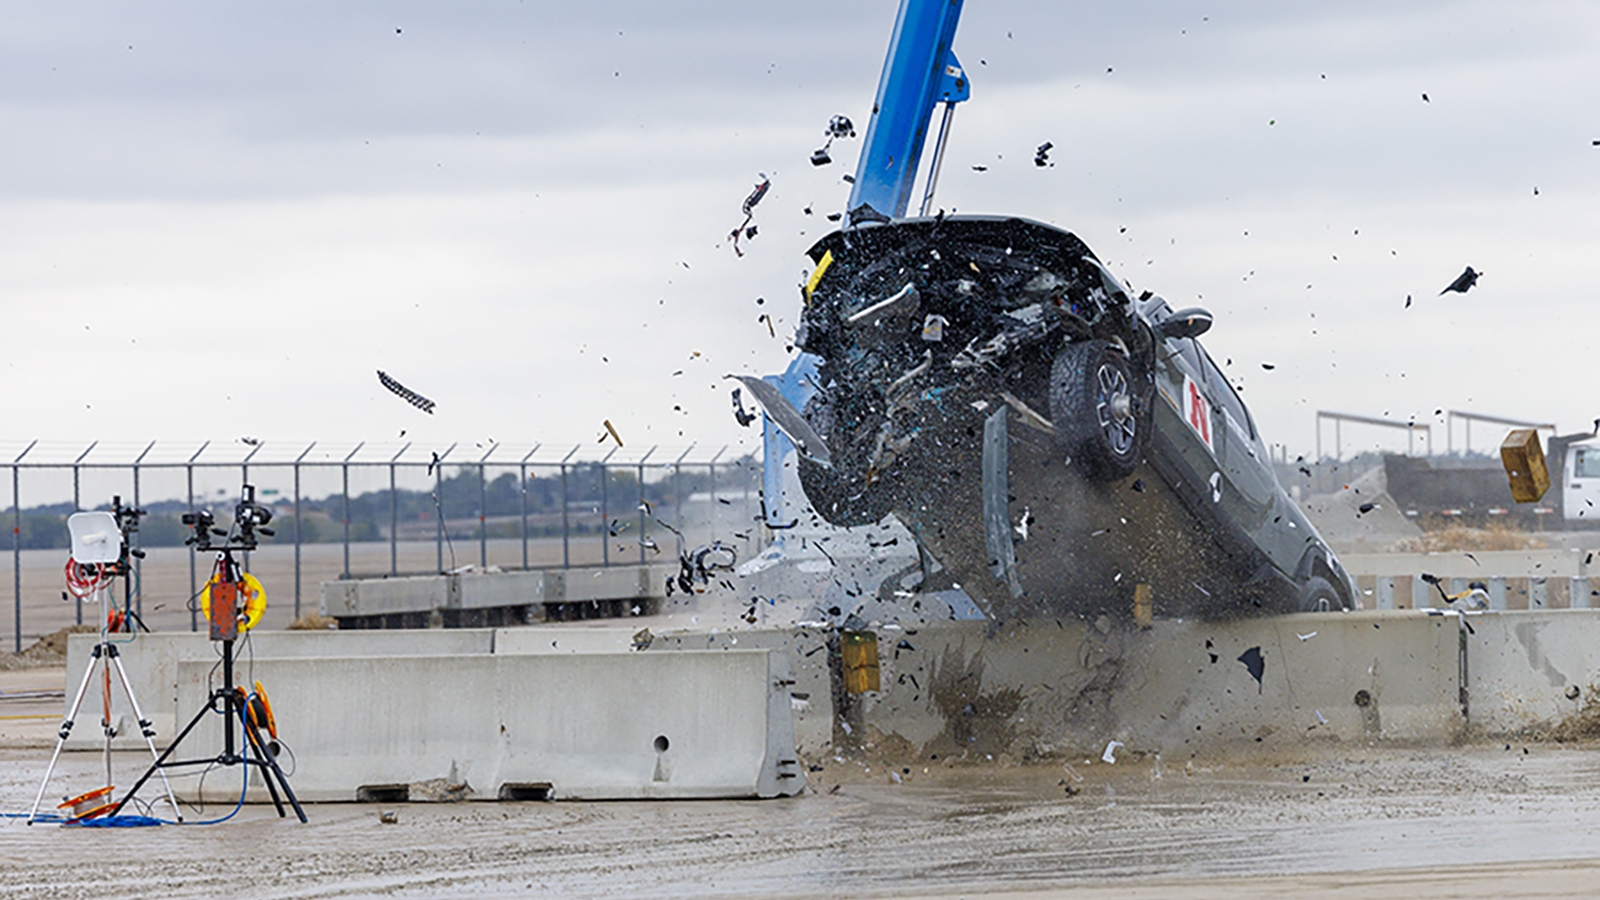 An electric vehicle is crash tested against a concrete barrier